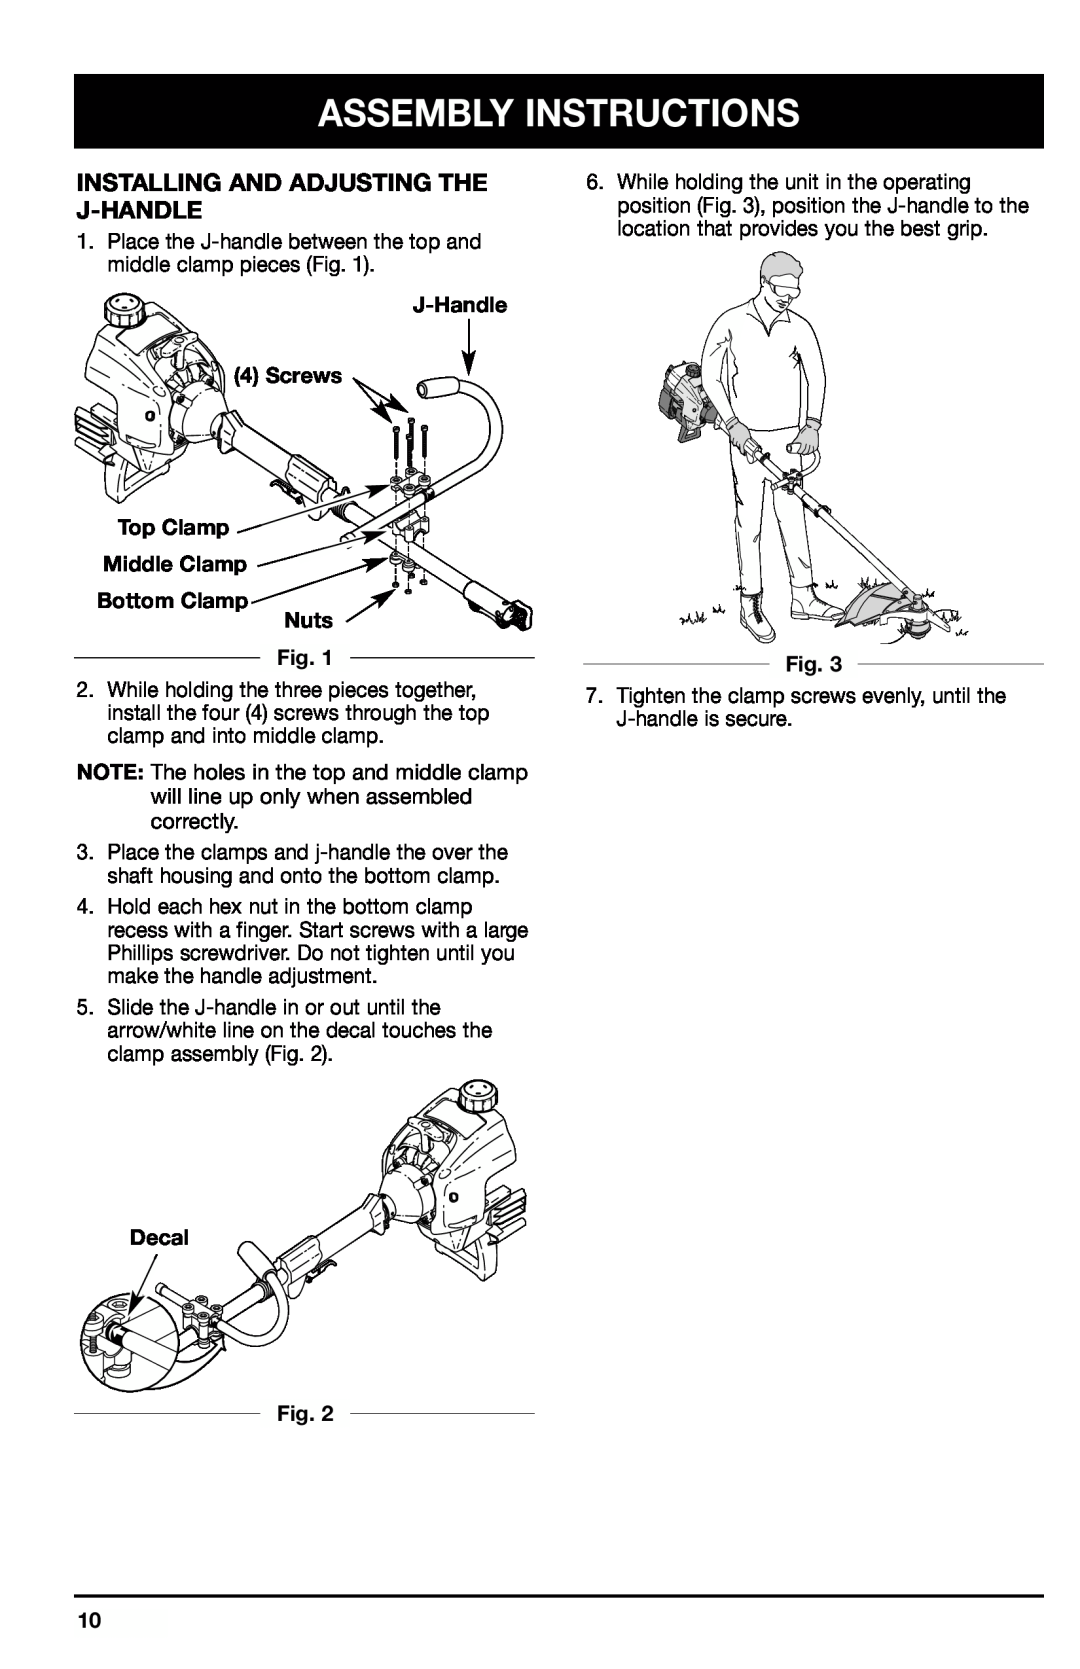 Ryobi 780r manual Assembly Instructions, Installing And Adjusting The J-Handle, Decal 